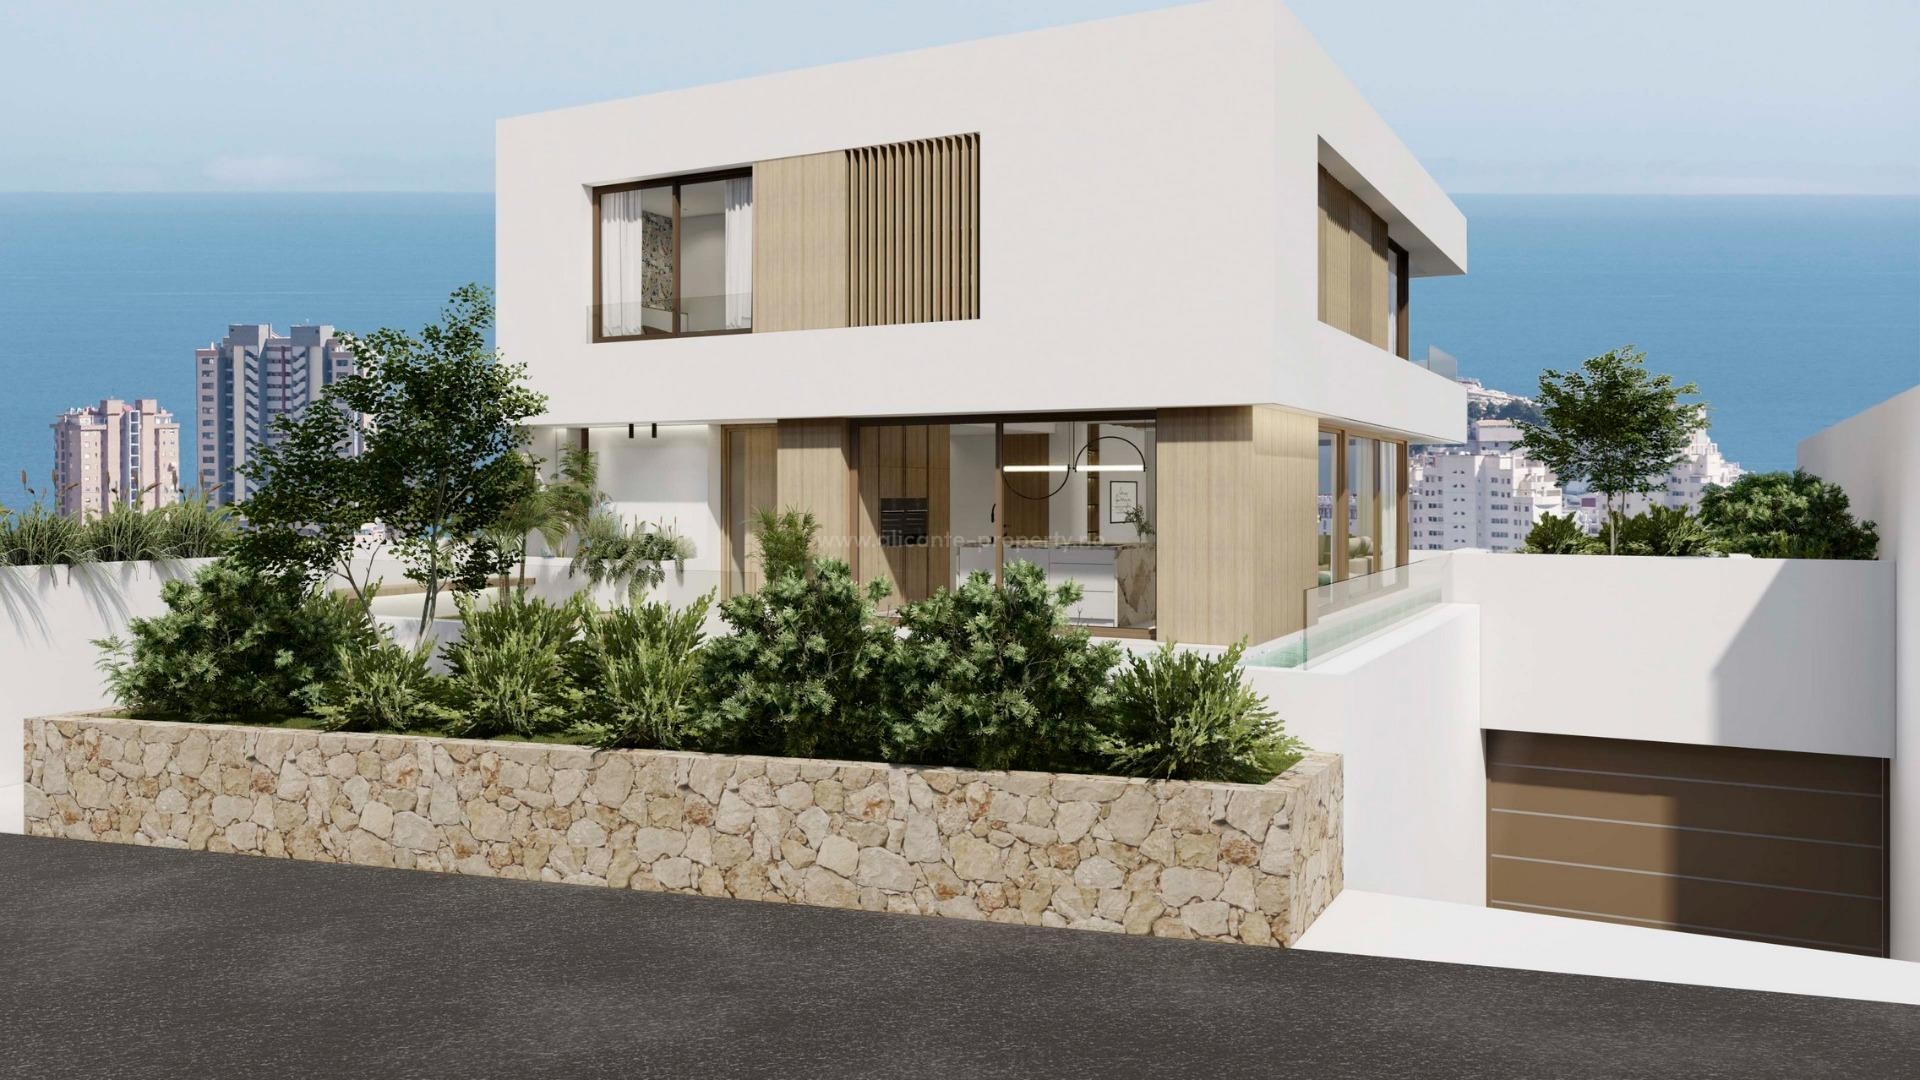 New built villas in Finestrat, private garden with swimming pool and sea view, 3 bedrooms and 3 bathrooms, guest toilet, open kitchen with living room, wardrobes.